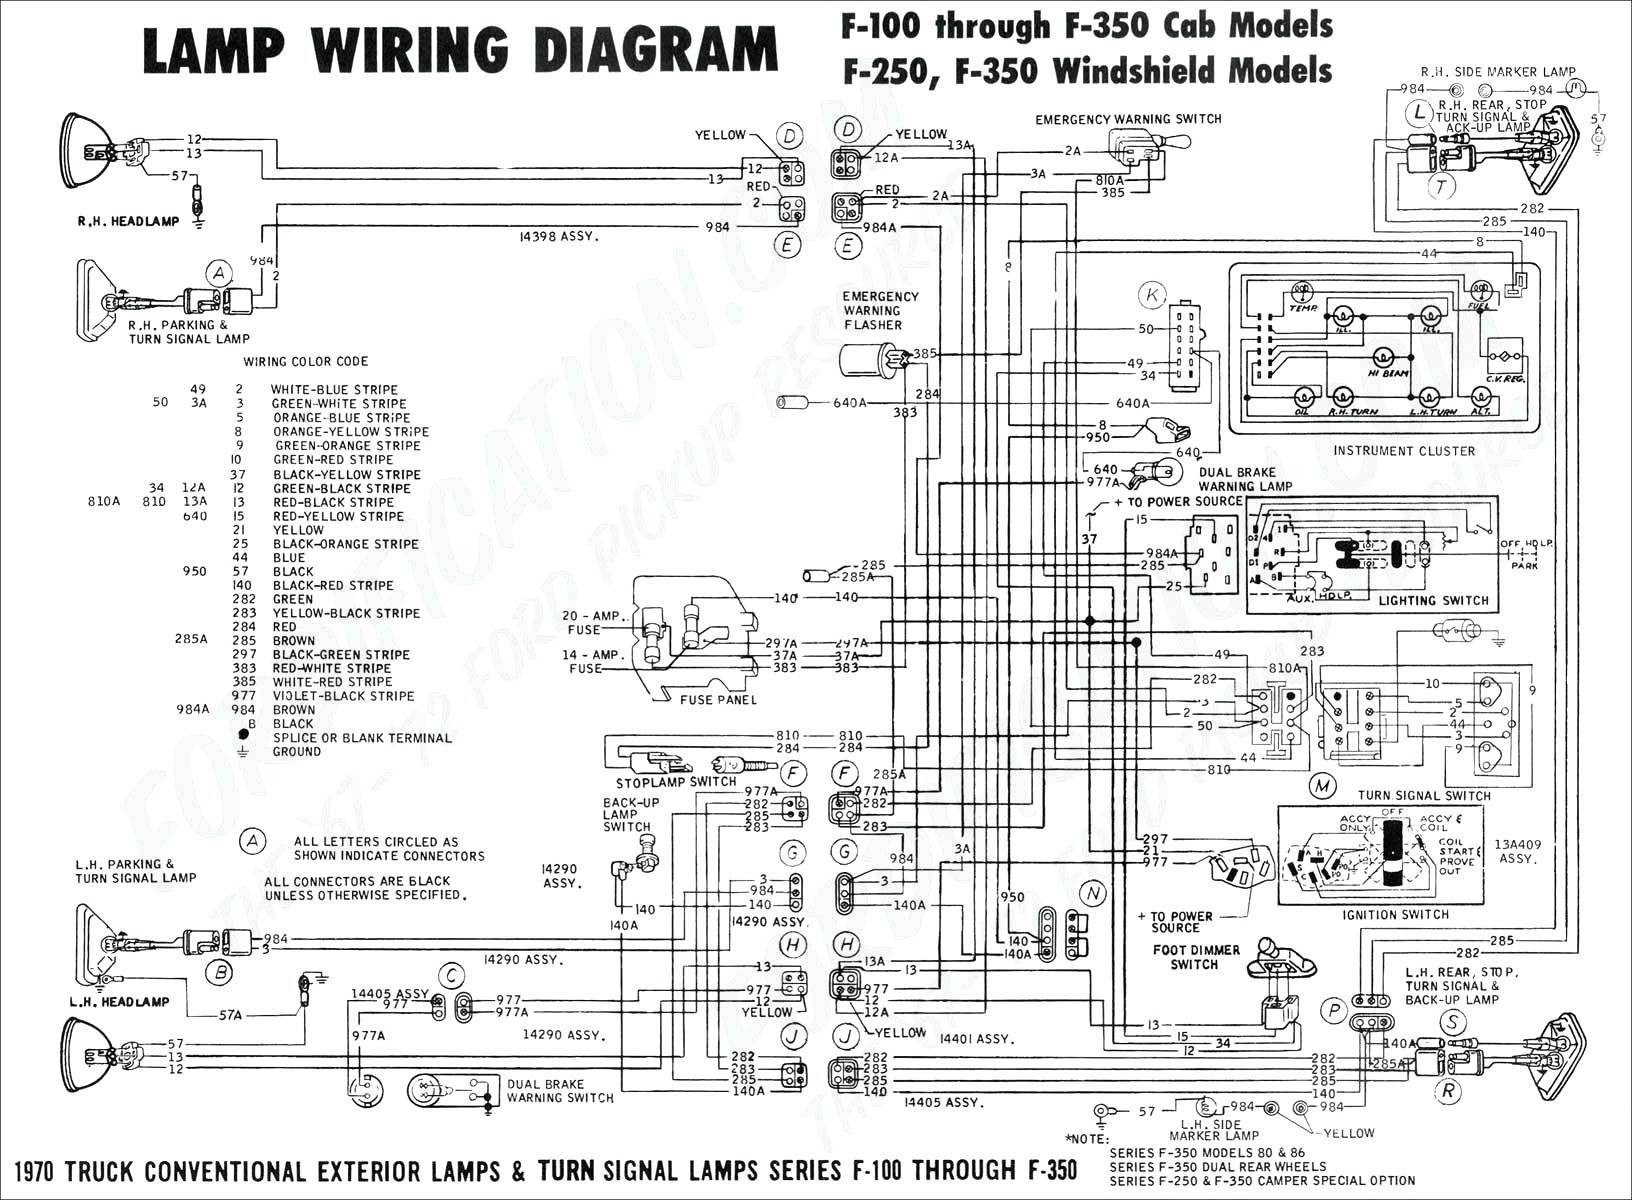 Electrical Wiring Diagram Books Electrical Wiring Diagram Ebook Wiring Diagram Home Of Electrical Wiring Diagram Books